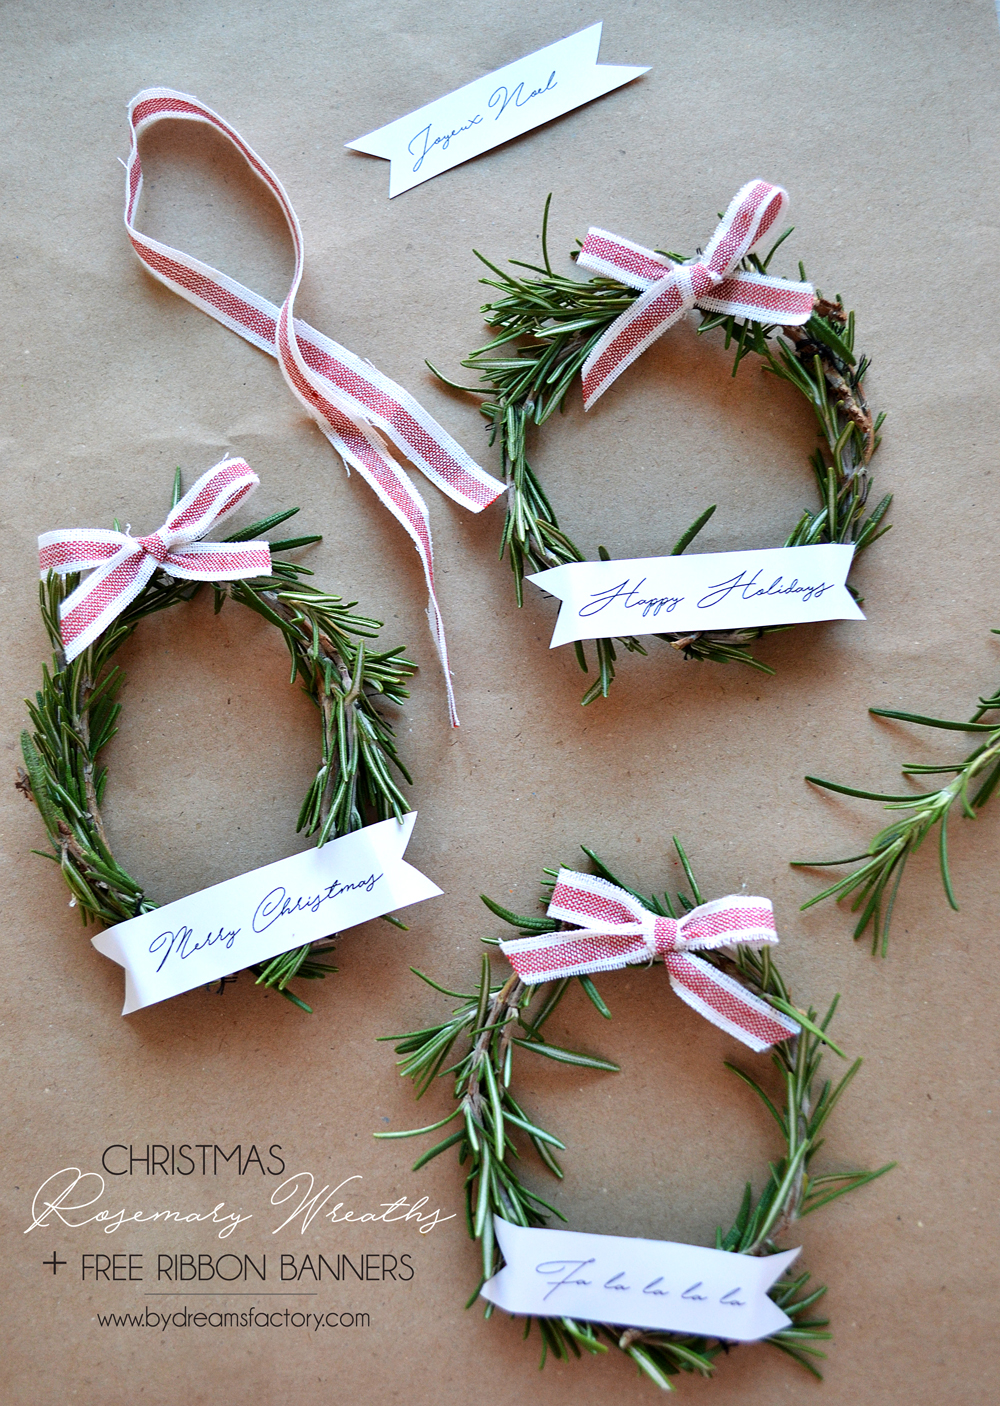 mini-rosemary-wreaths-free-ribbon-banners-for-christmas-42-1